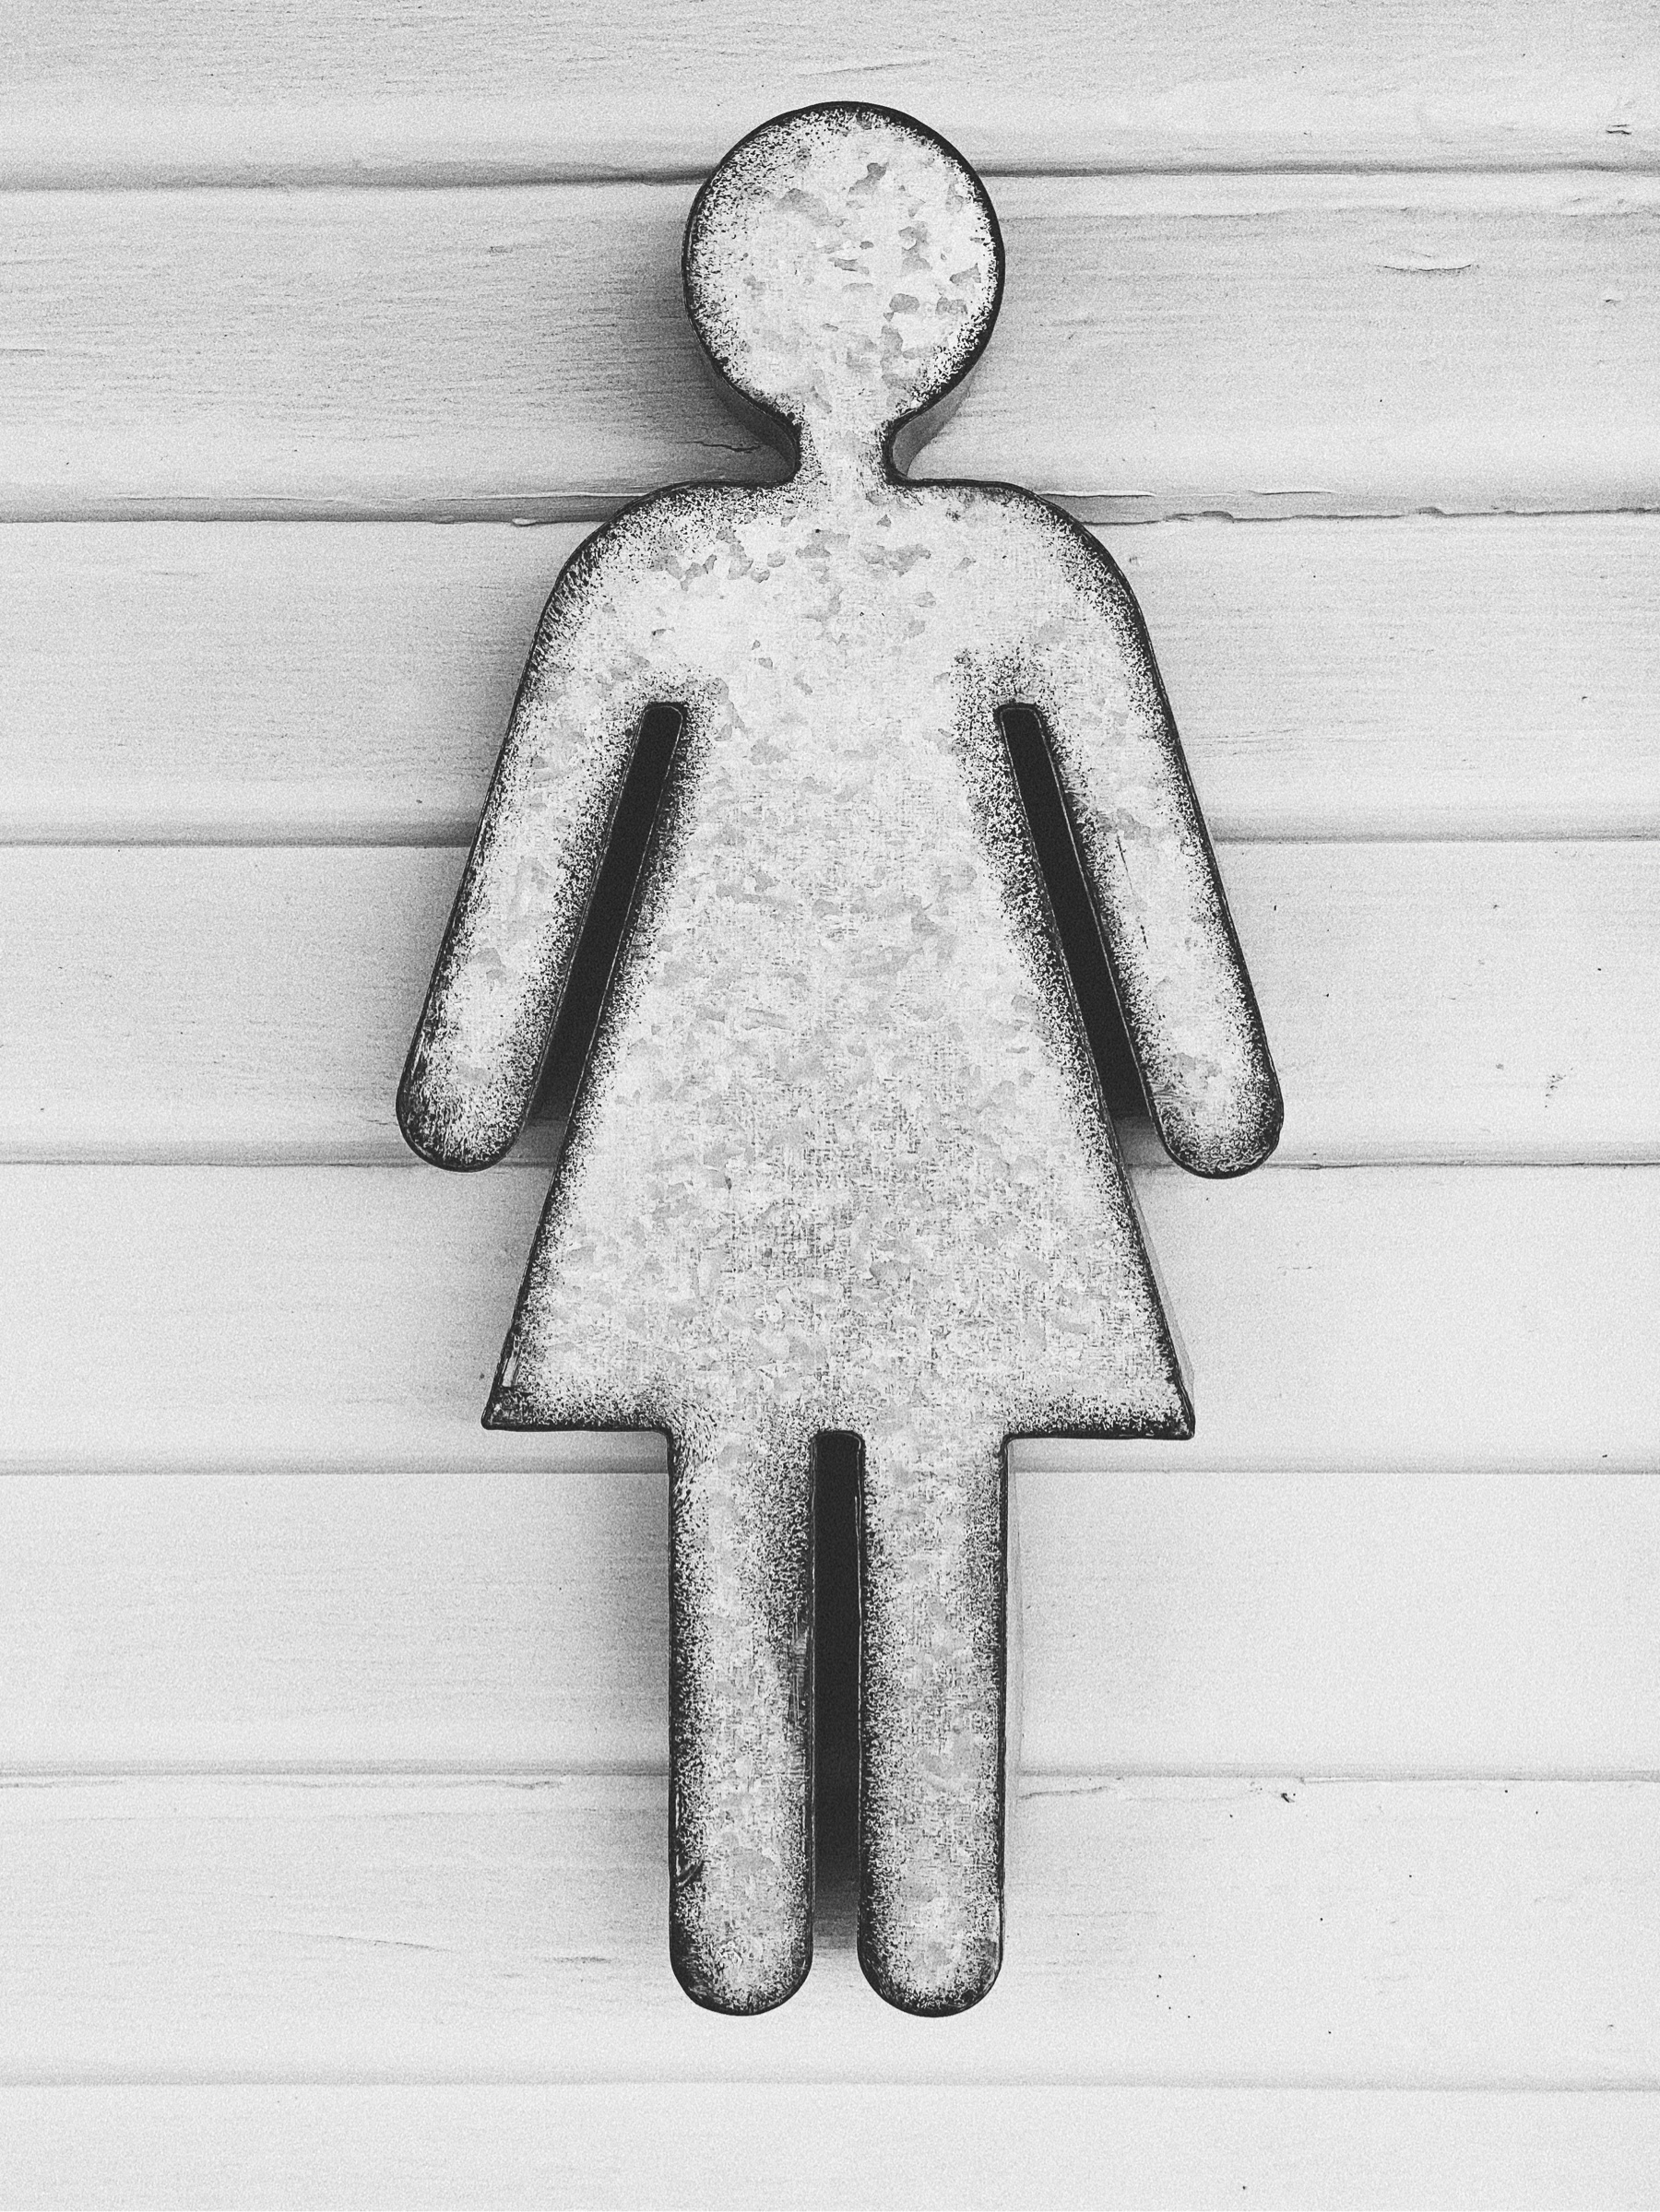 Shape of woman made out of metal affixed to wood siding